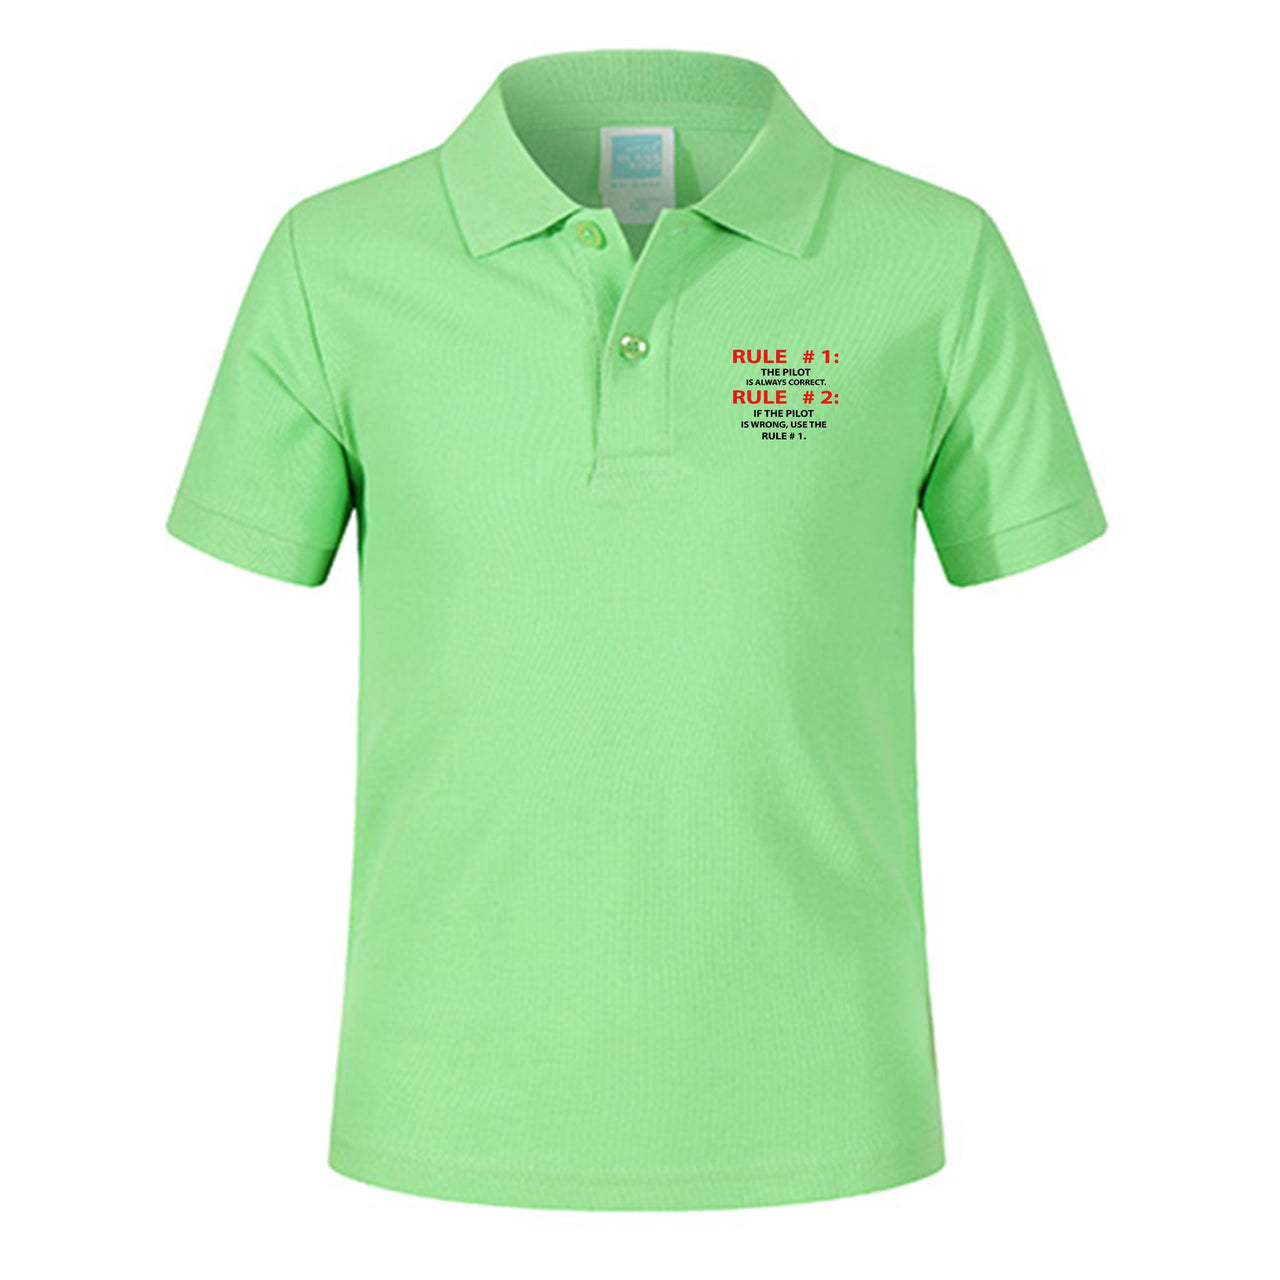 Rule 1 - Pilot is Always Correct Designed Children Polo T-Shirts